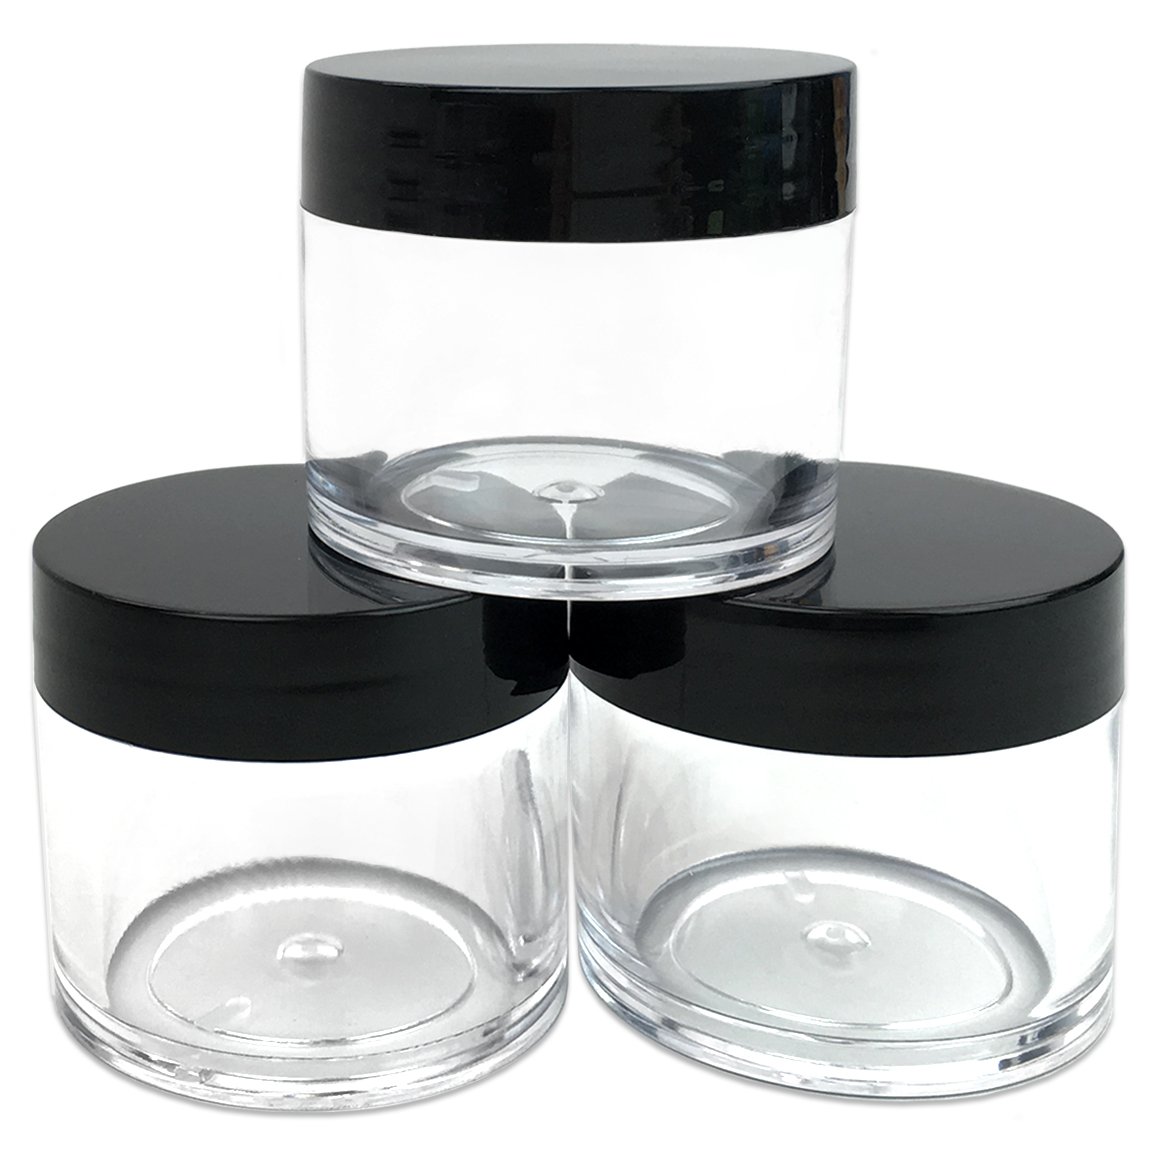 Beauticom 30g/30ml (1 fl. oz.) Double Wall Clear Plastic Leak Proof Jars with Flat Top Lids for Creams, Lotions, Make Up, Powders, Glitters, and more... (Color: Black Lid, Pieces: 12)